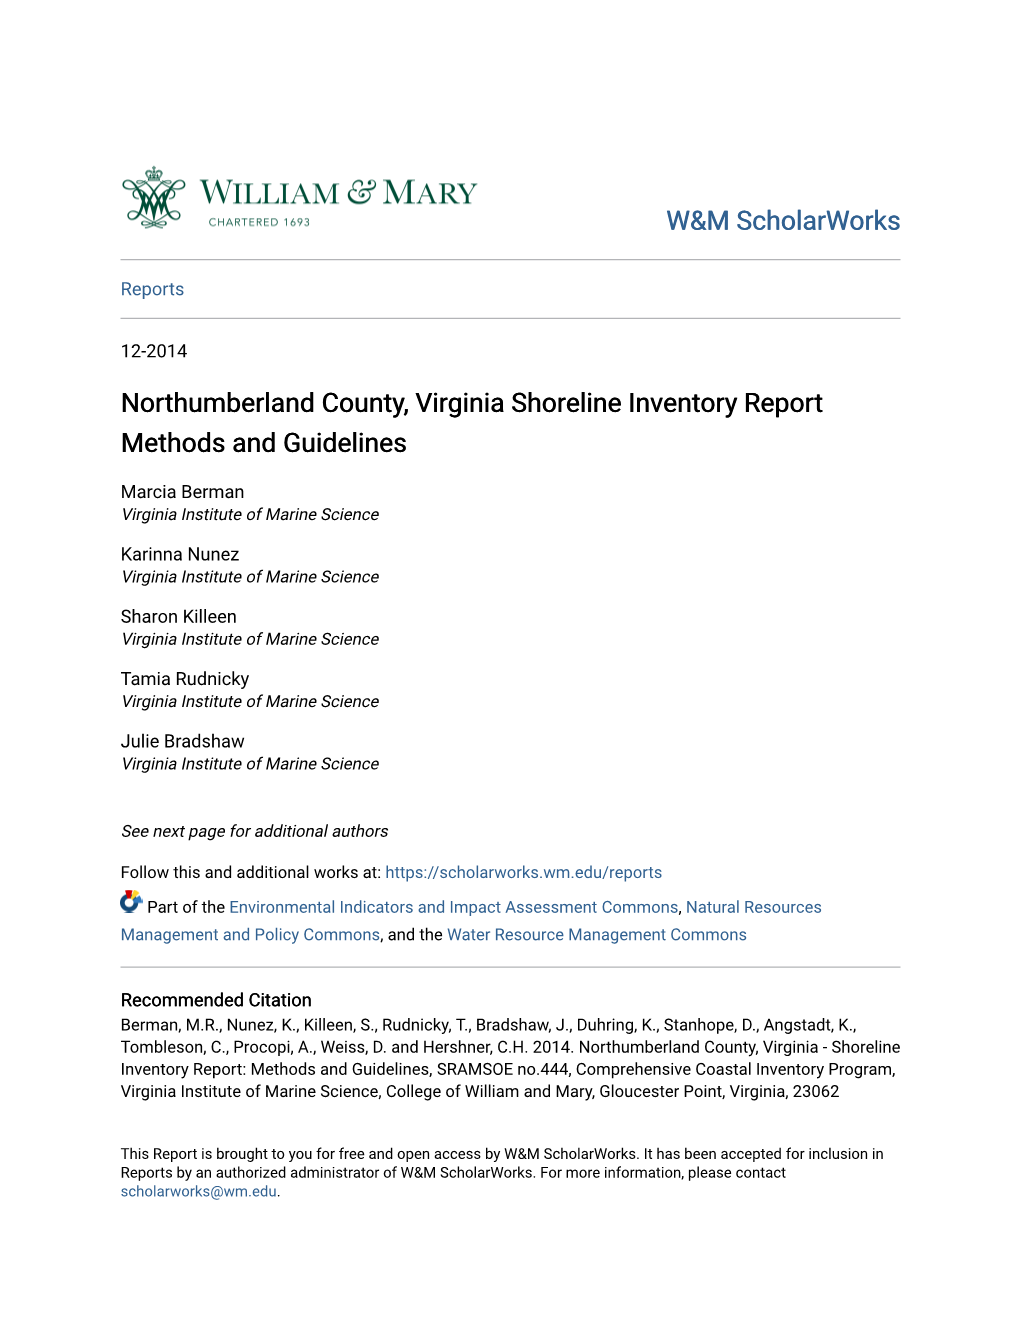 Northumberland County, Virginia Shoreline Inventory Report Methods and Guidelines